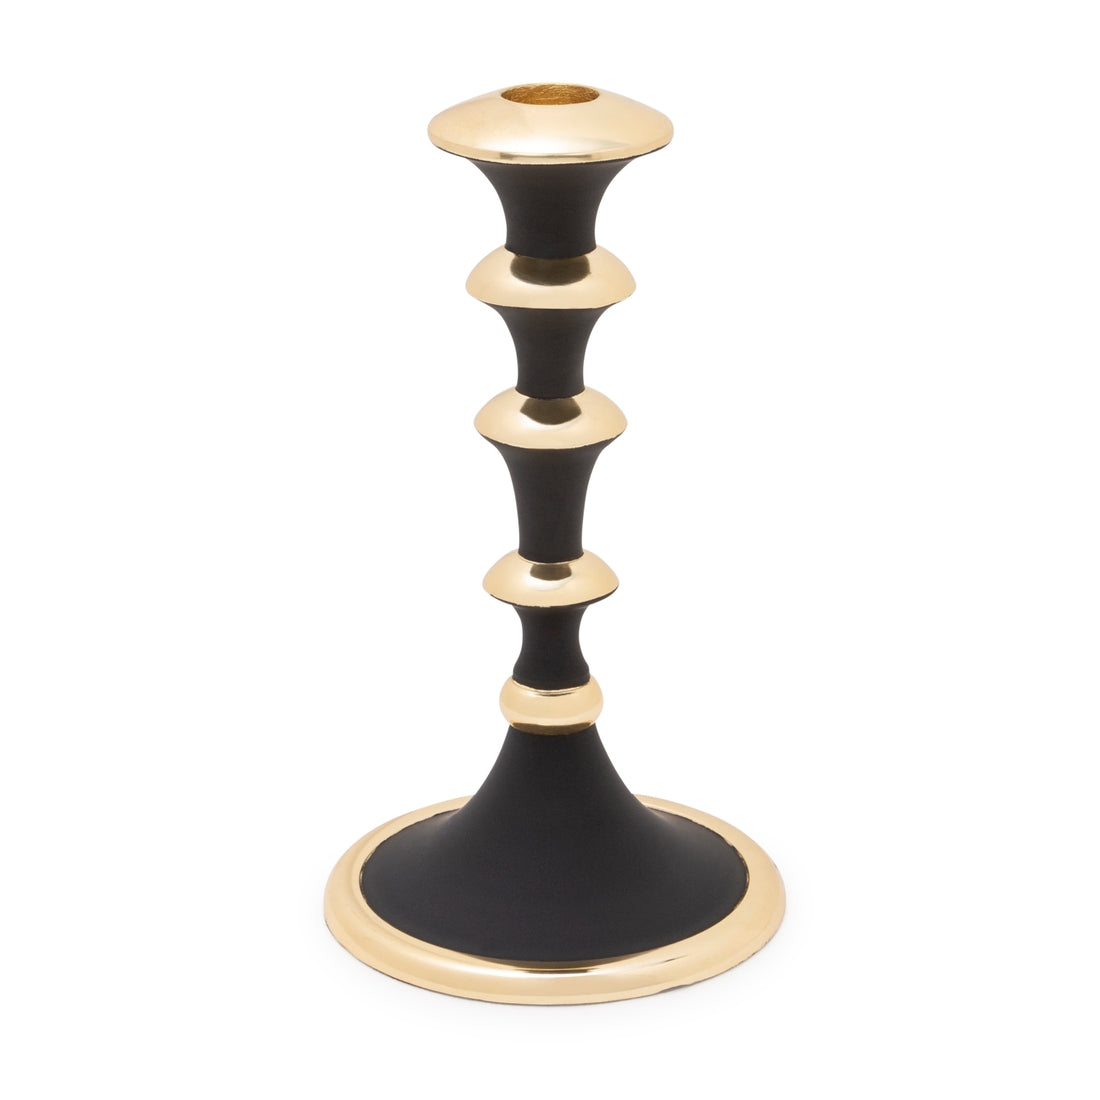 Black And Gold Candlestick- 3 sizes